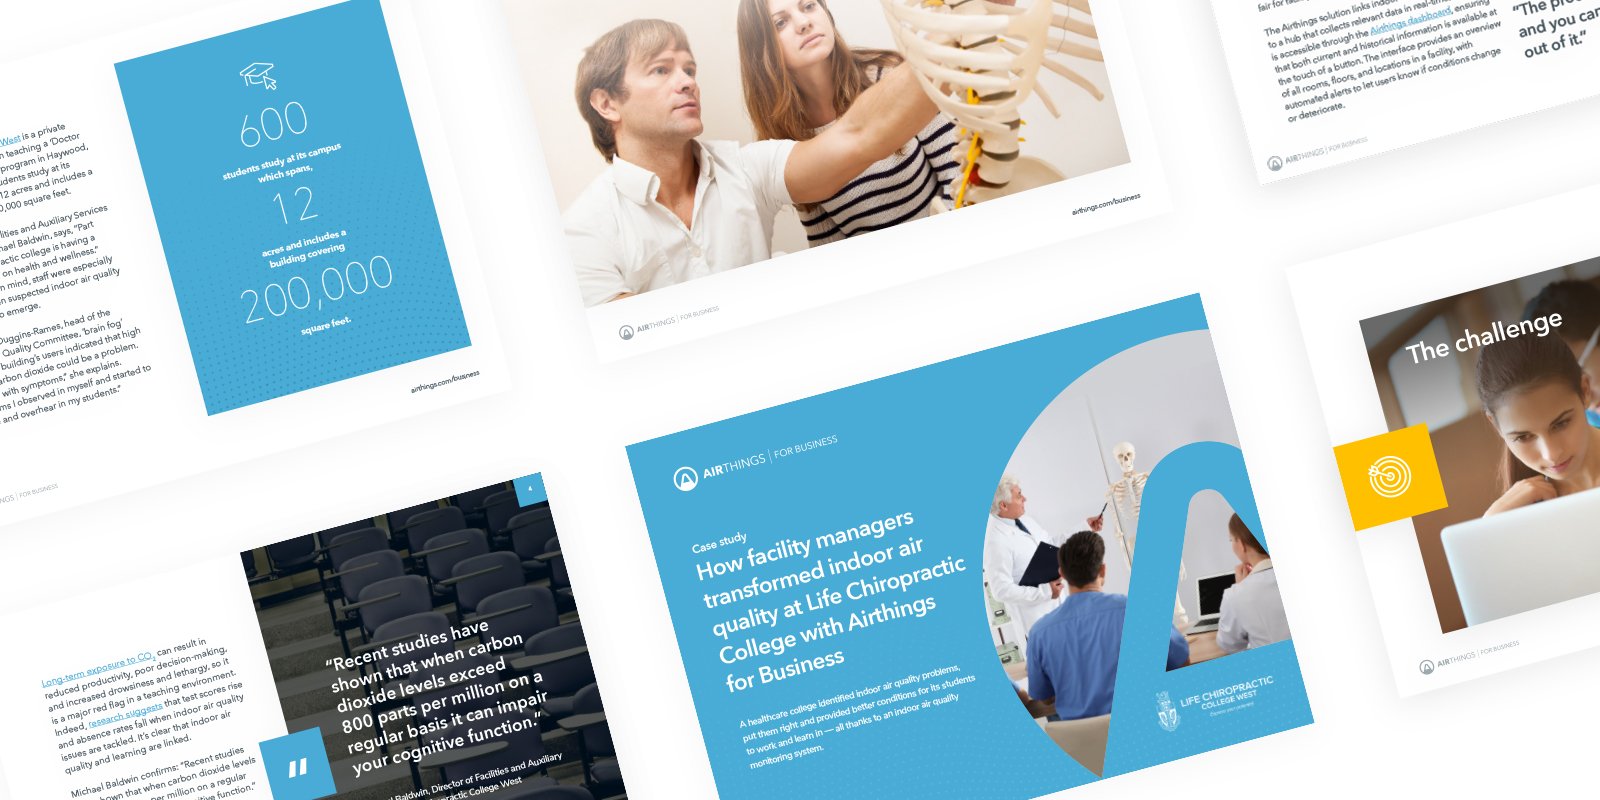 Life Chiropractic College case study - Social image-02